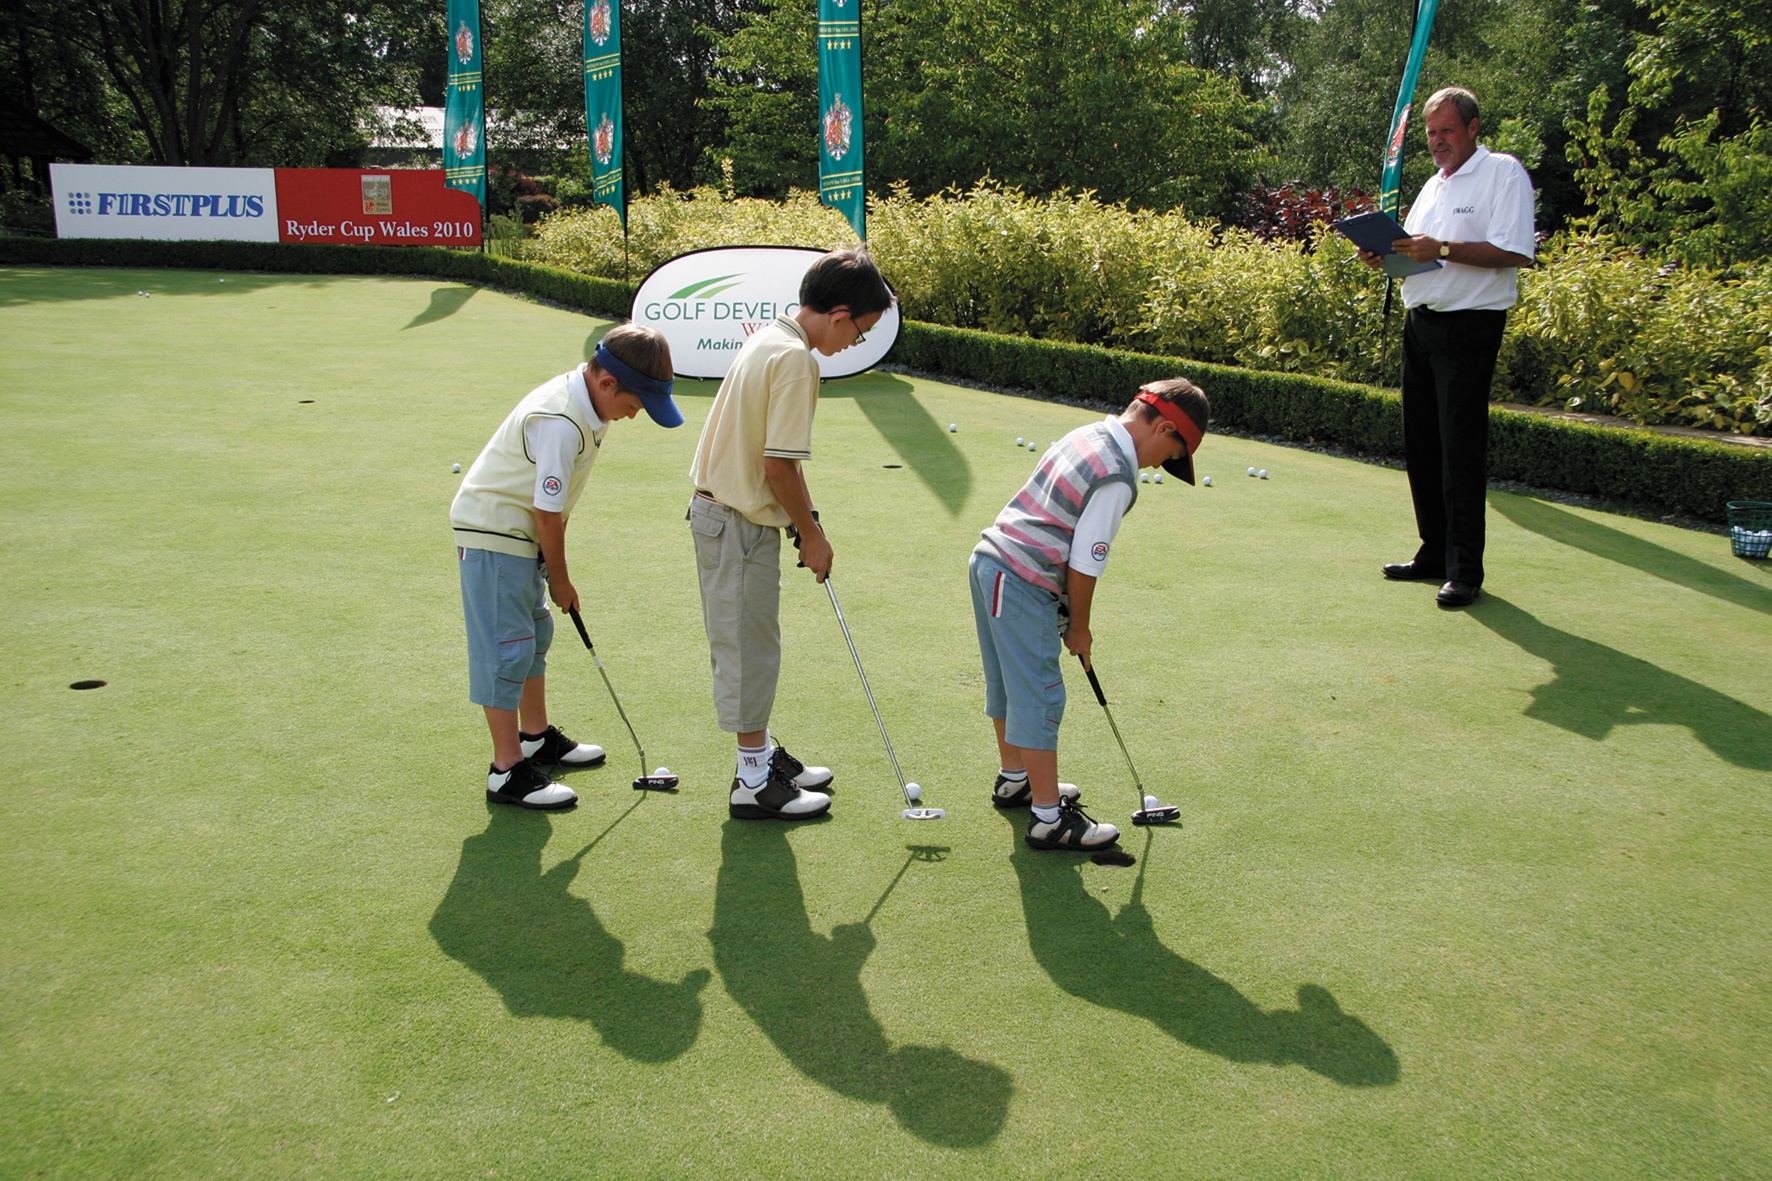 Three young boys having a golf lesson at the Vale Resort 